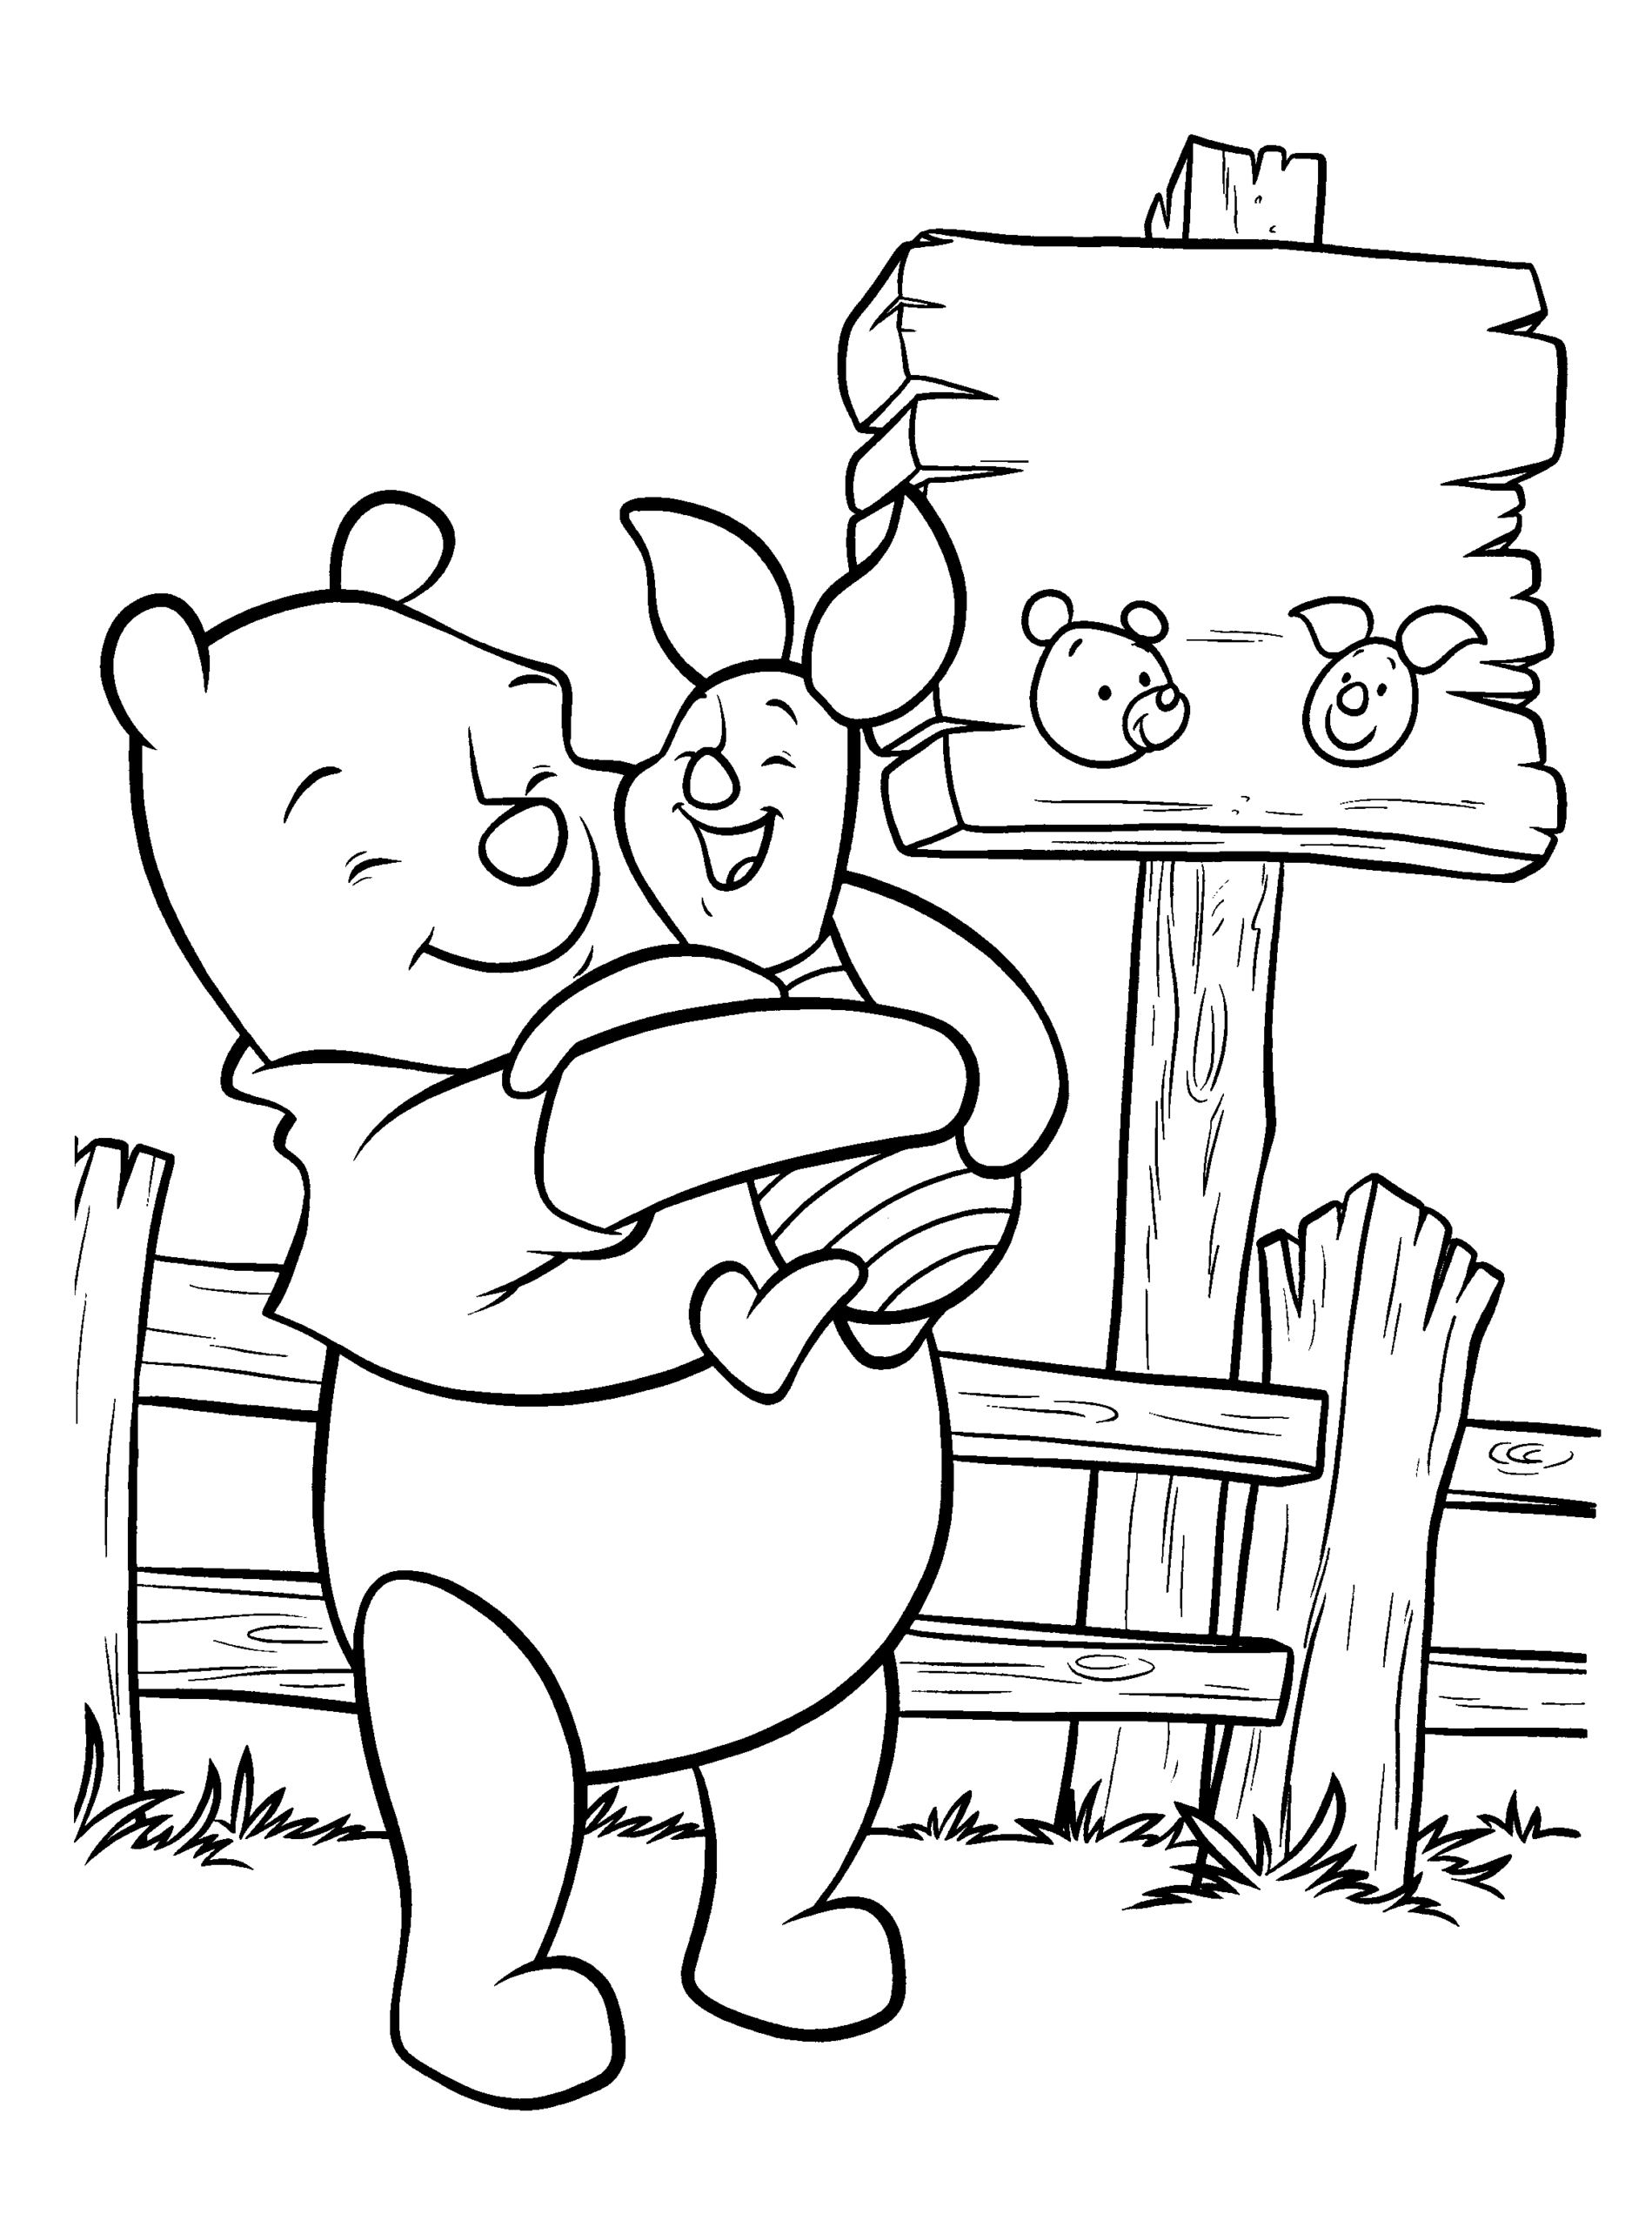 Winnie the Pooh Coloring Pages Cartoons winnie the pooh 1 Printable 2020 7076 Coloring4free